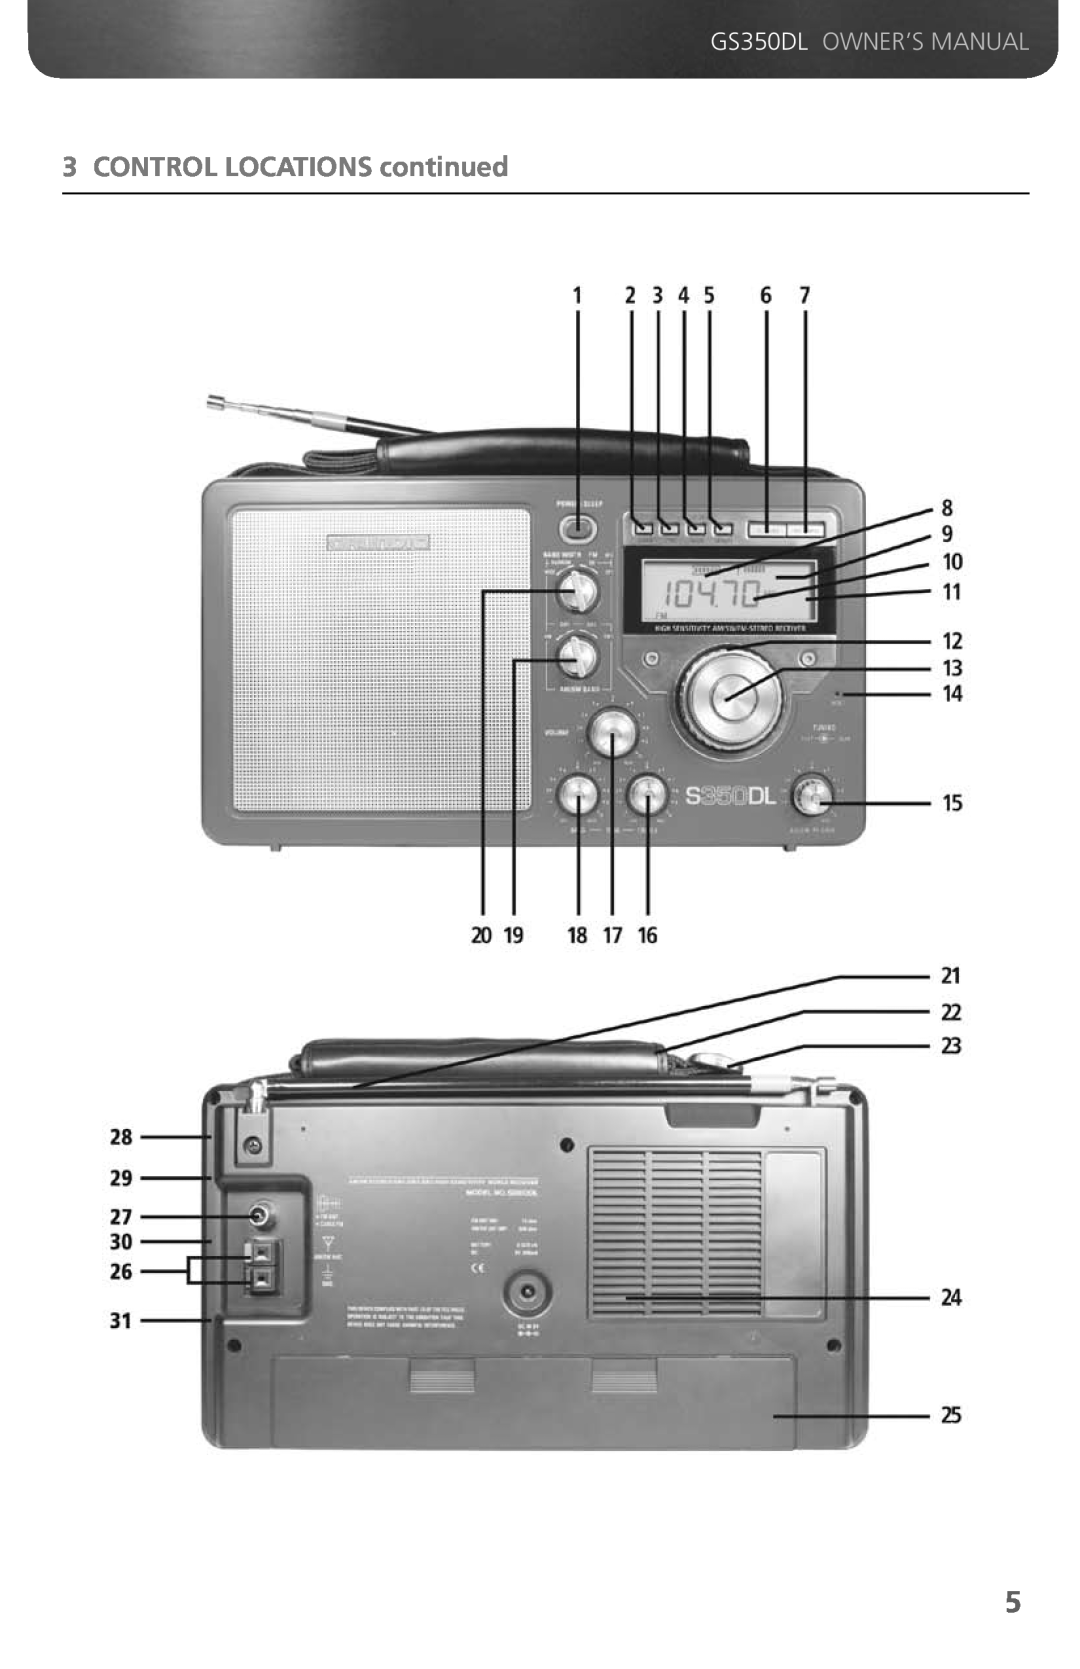 Grundig GS350DL owner manual CONTROL LOCATIONS continued 